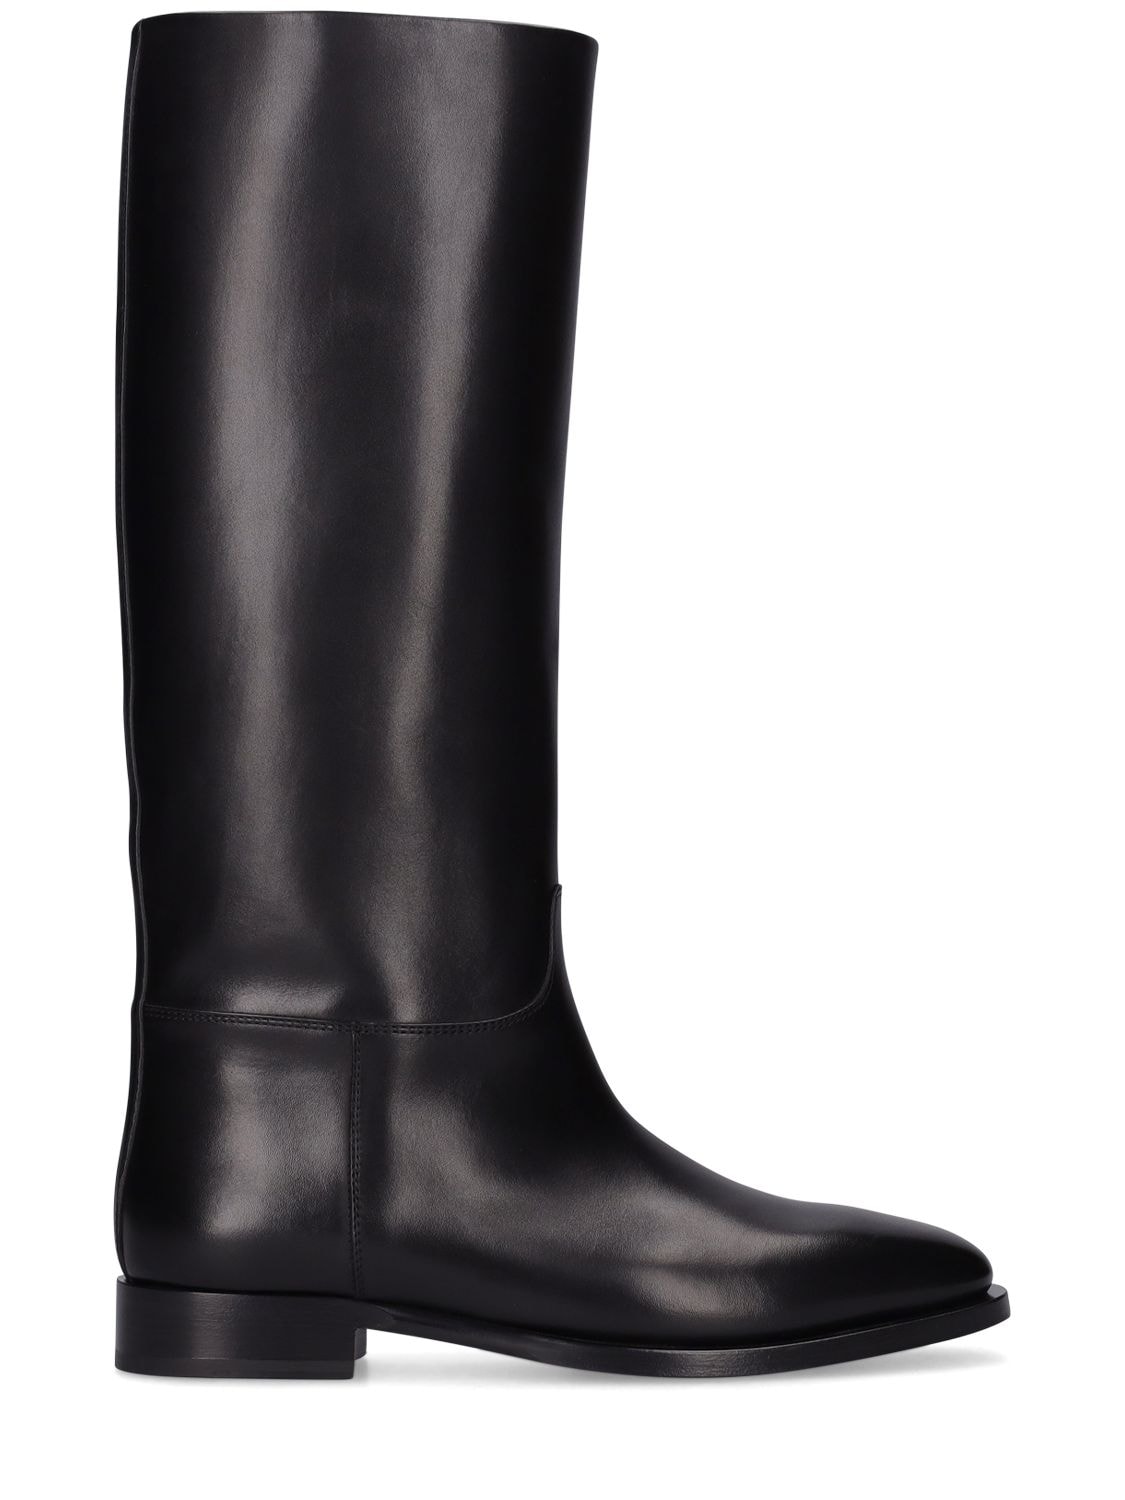 20mm Grunge Leather Tall Boots